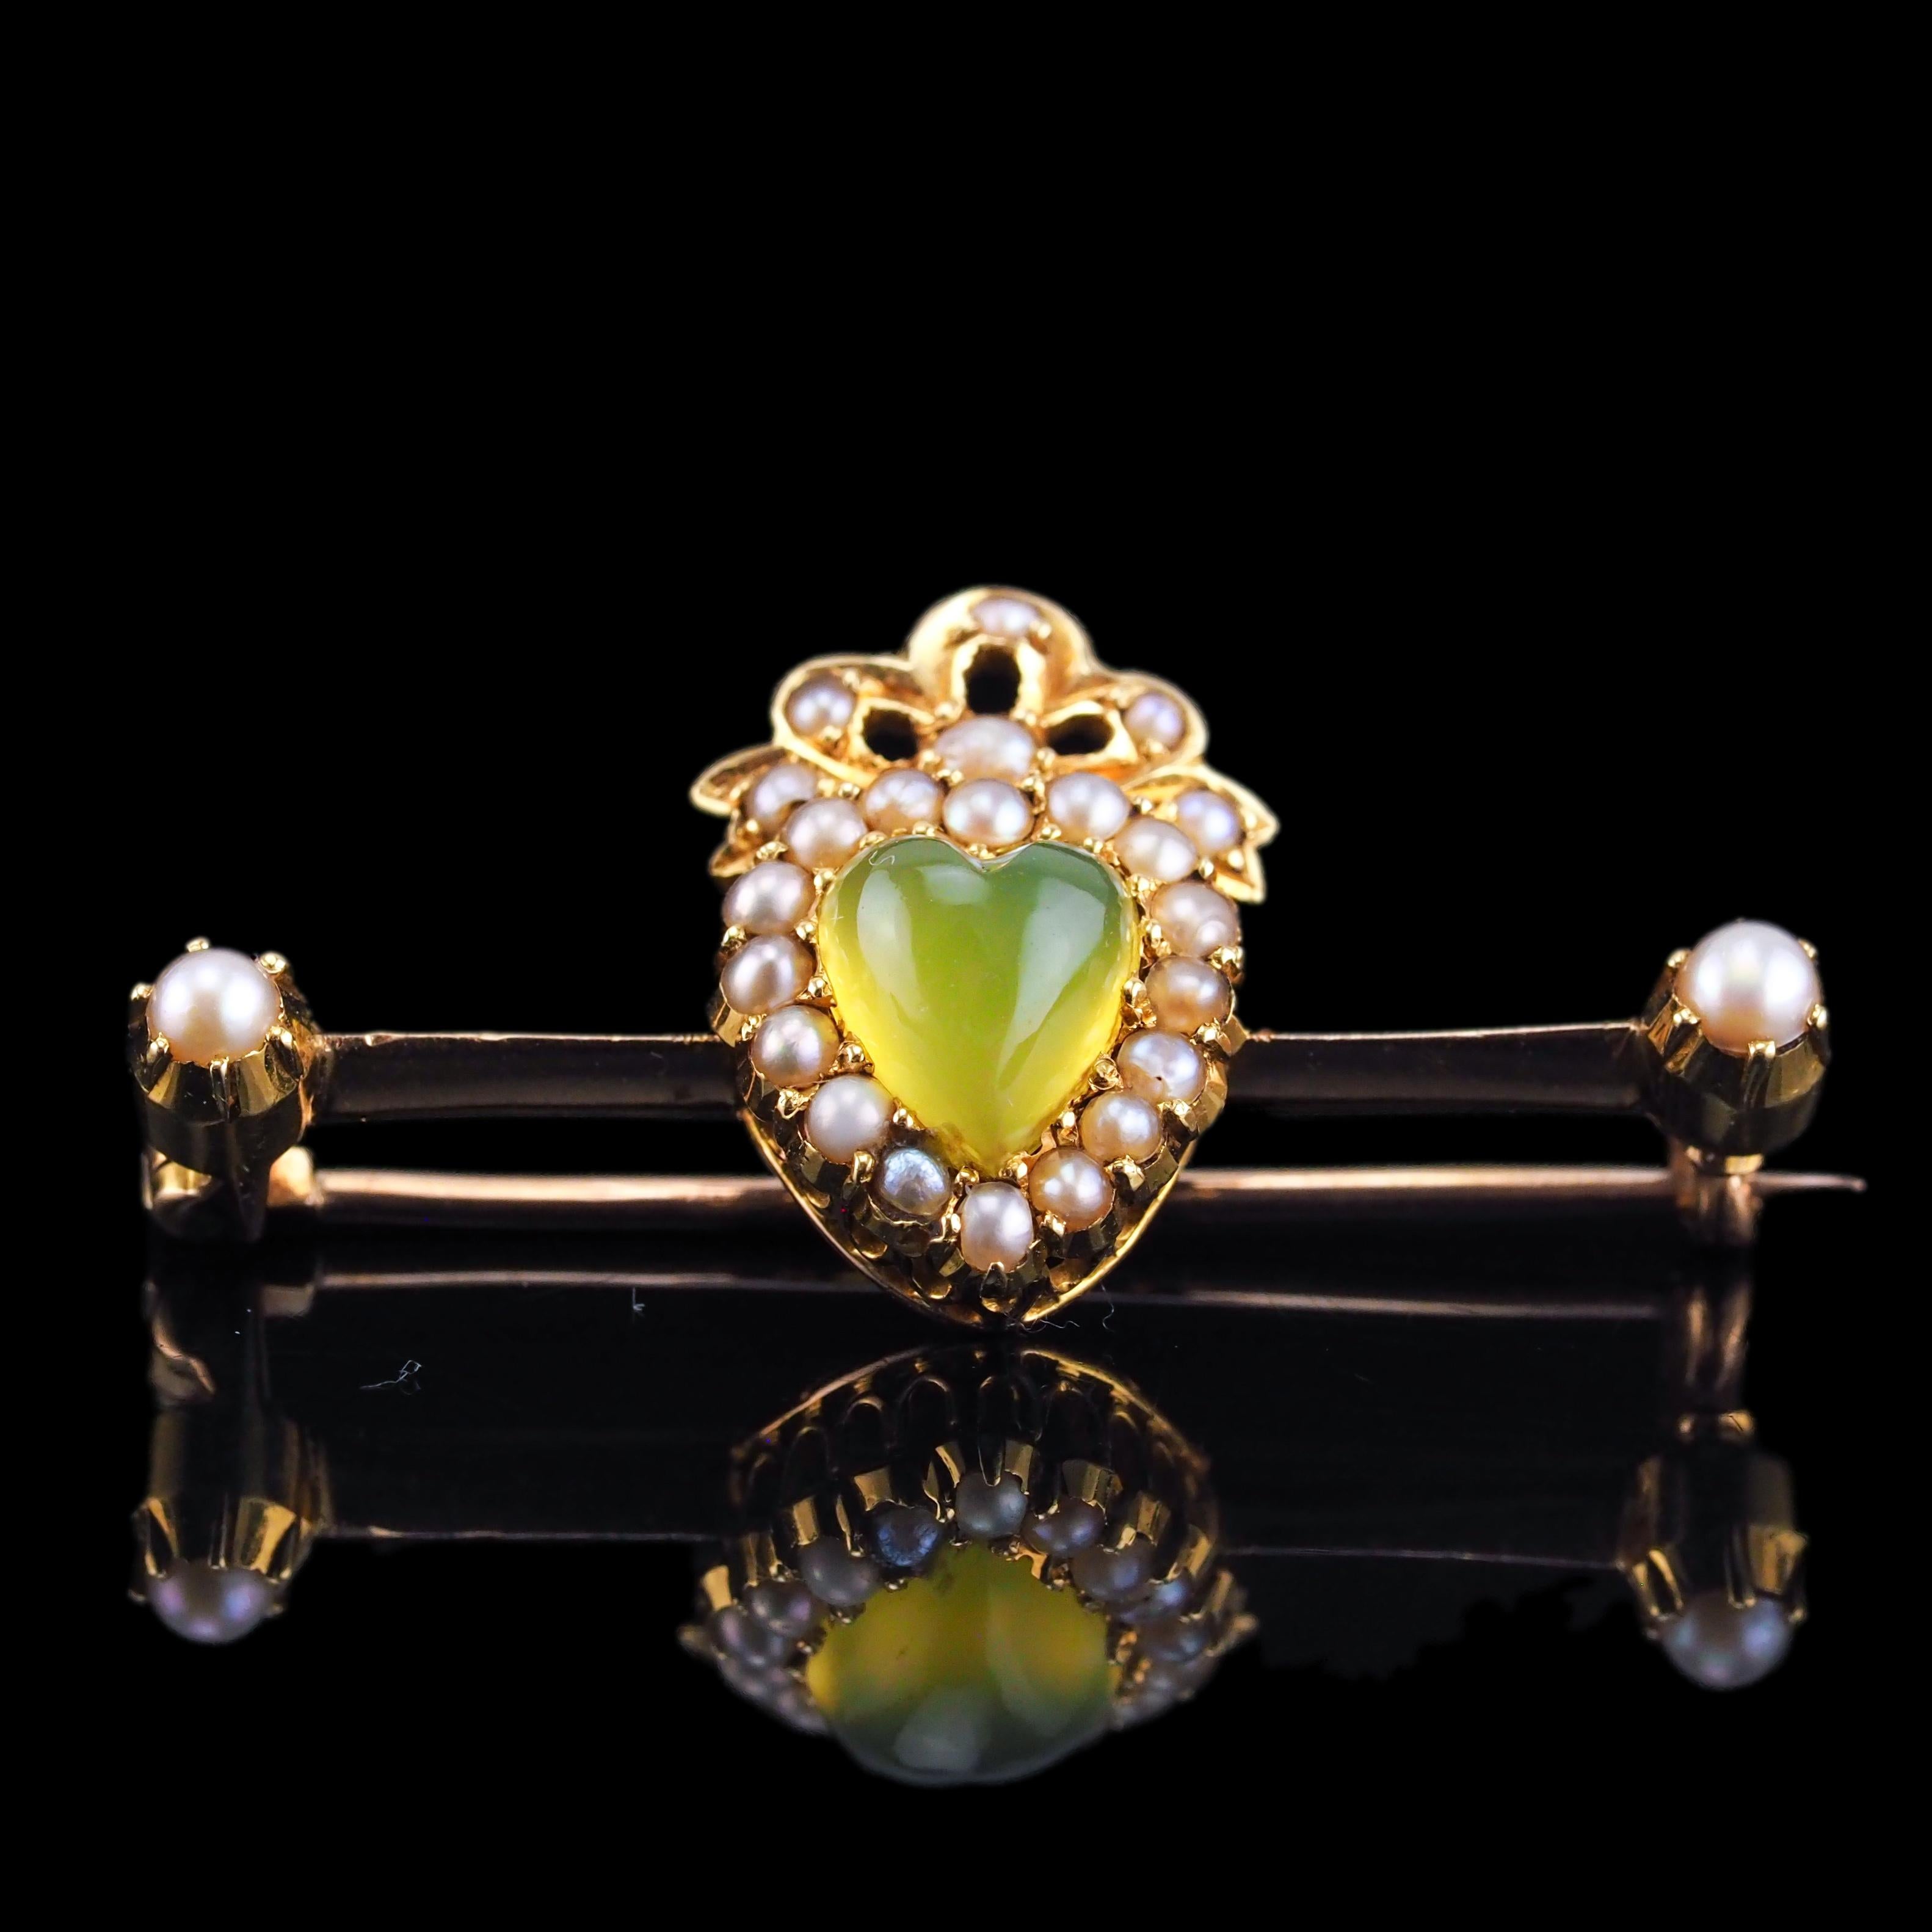 Antique Victorian Chalcedony Brooch  Seed Pearls 15K Gold Heart Shaped c.1890 For Sale 6